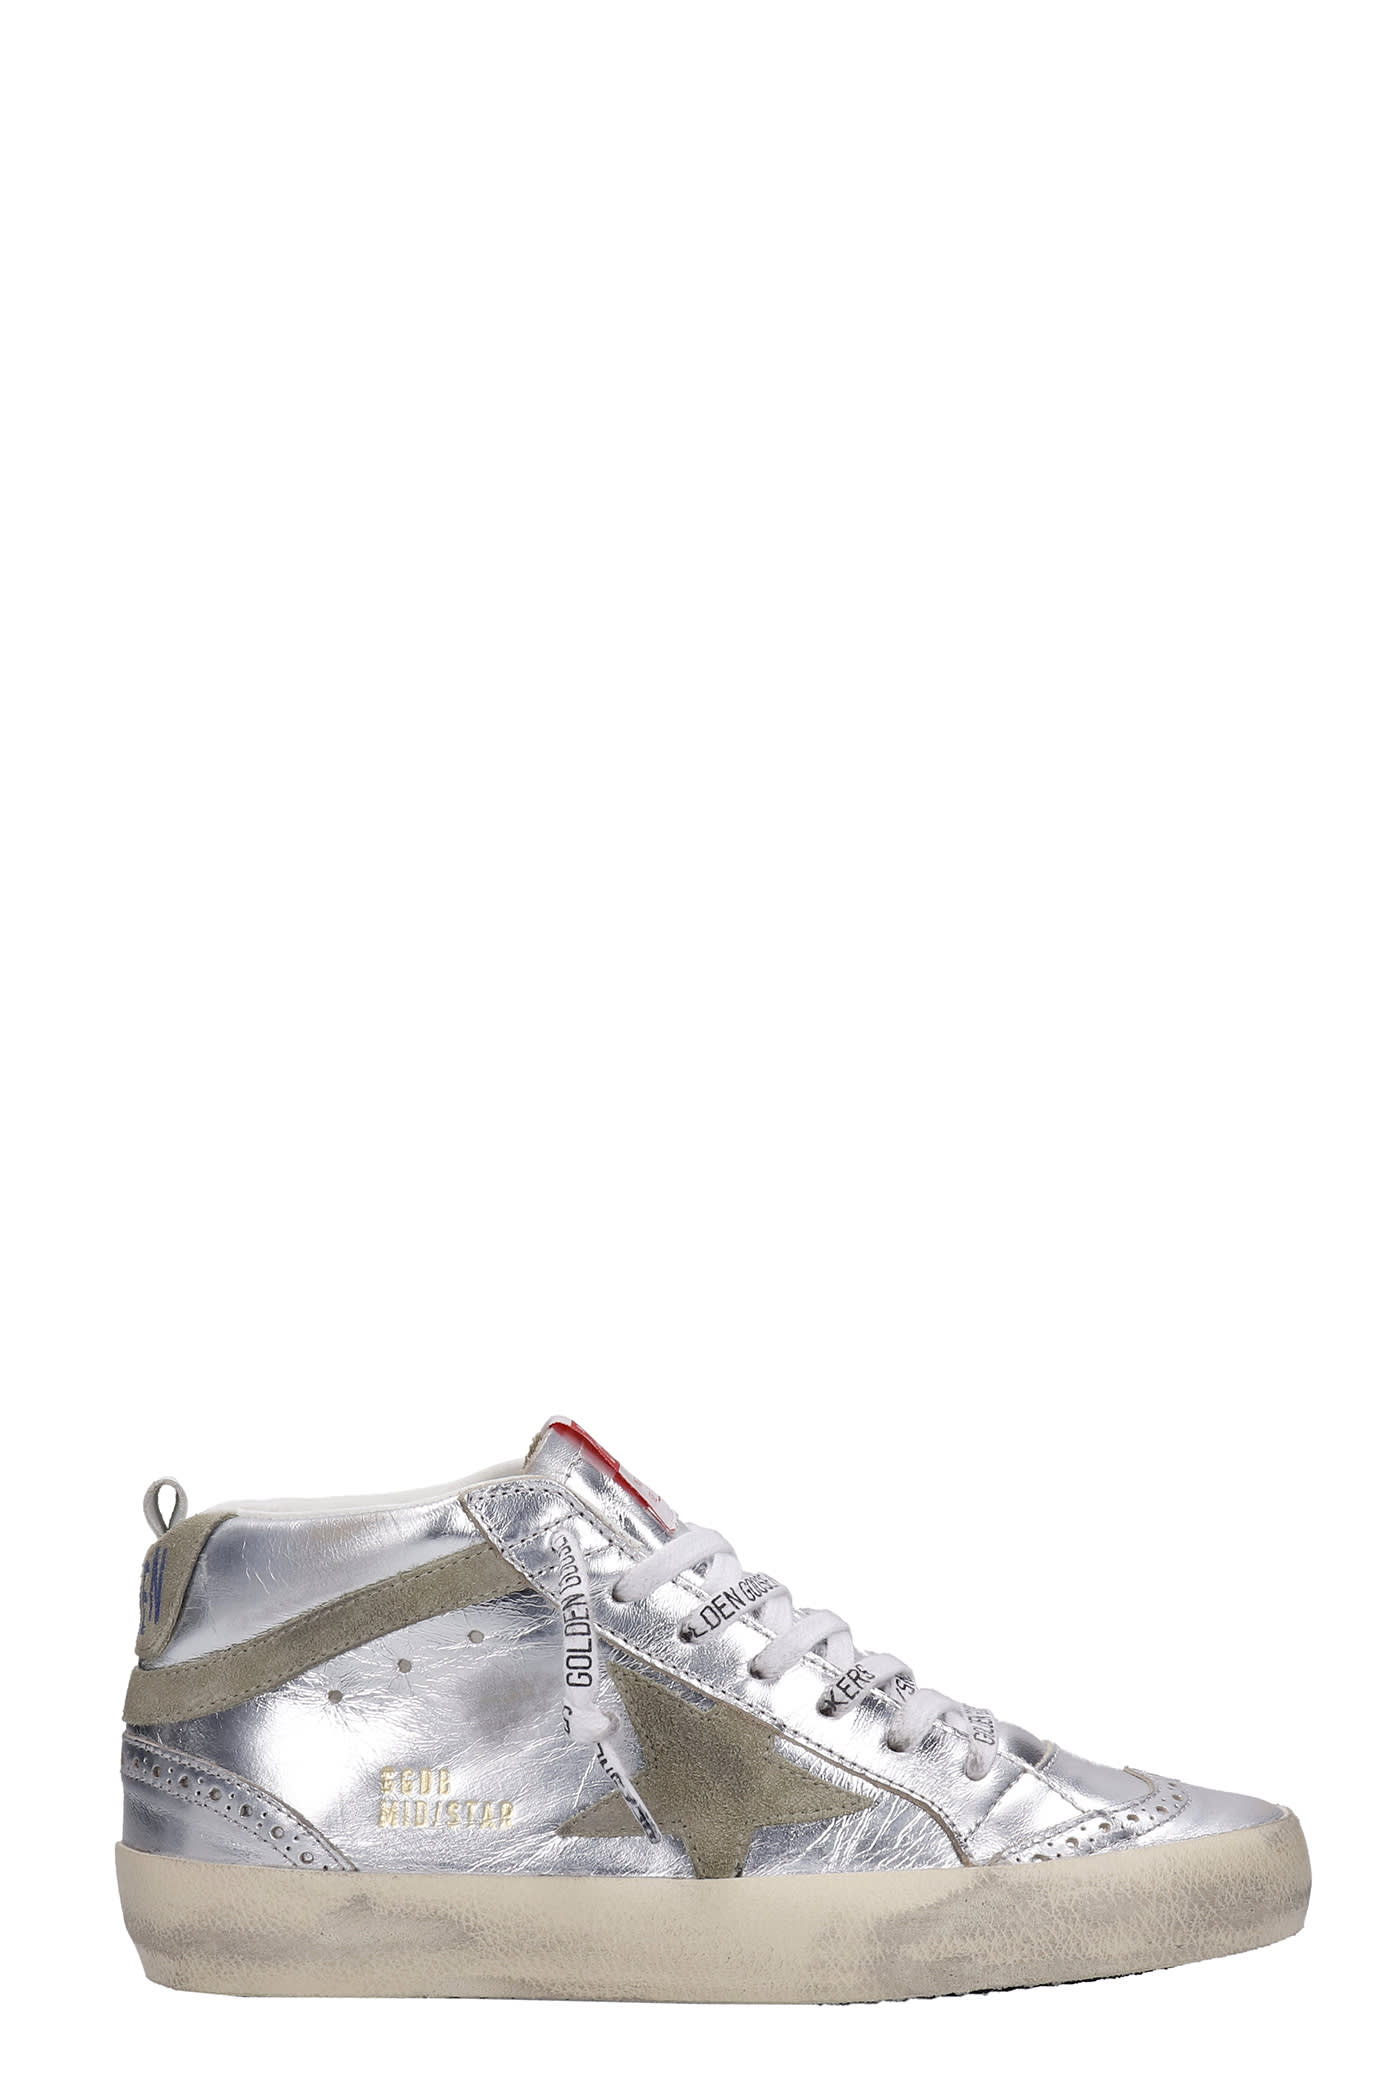 Golden Goose Mid Star Sneakers In Silver Leather